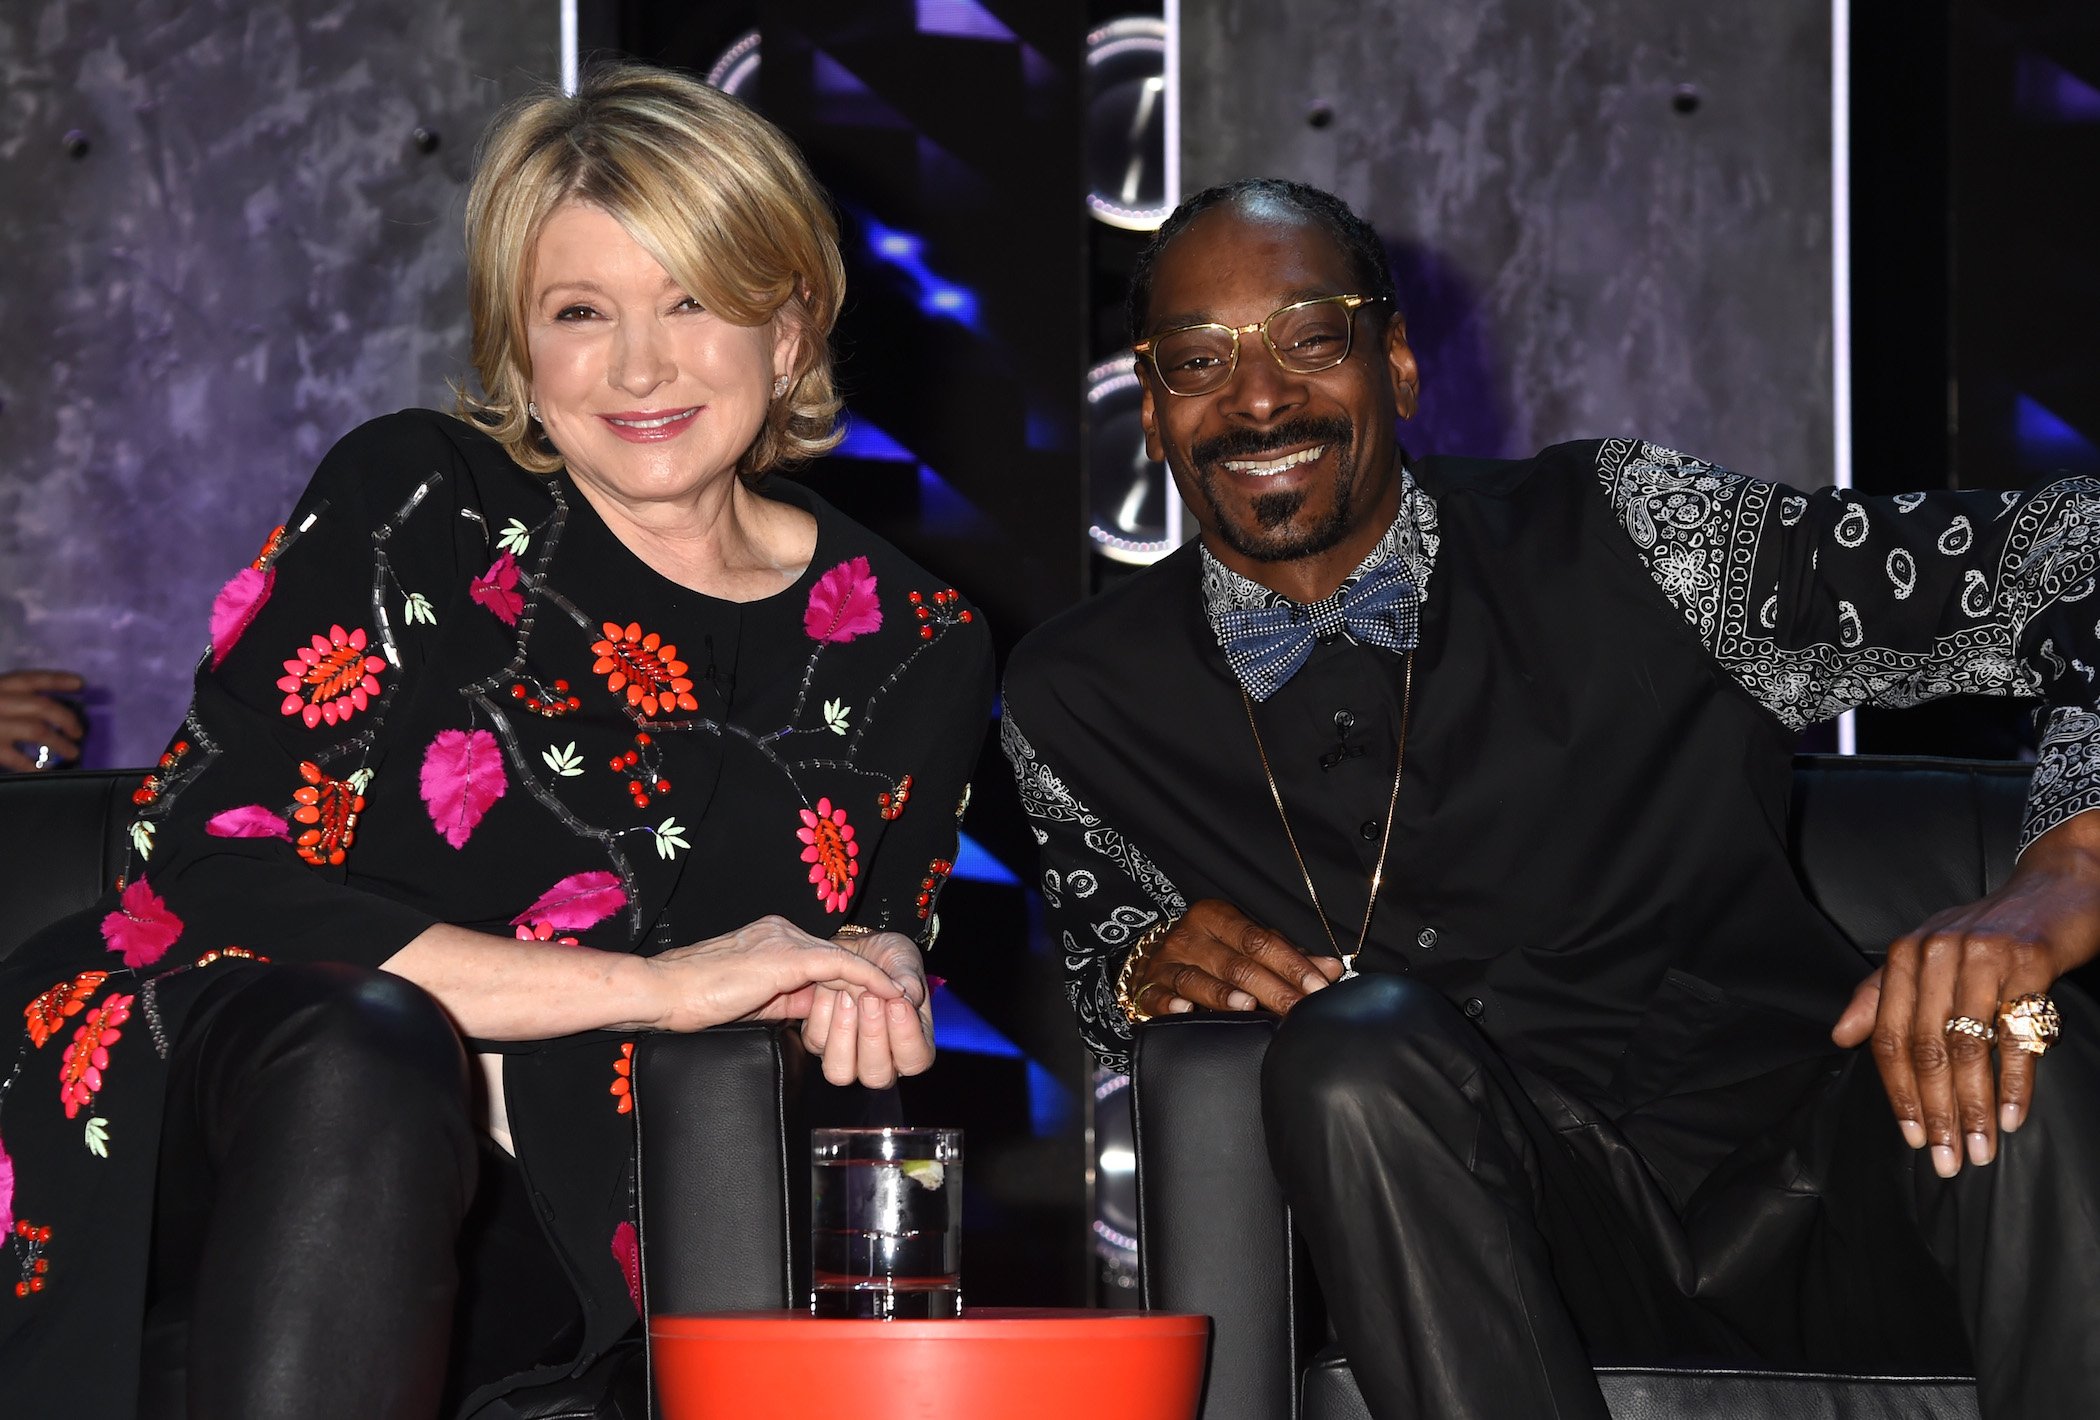 TV personality Martha Stewart (L) and recording artist Snoop Dogg attend The Comedy Central Roast of Justin Bieber at Sony Pictures Studios on March 14, 2015 in Los Angeles, California. The Comedy Central Roast of Justin Bieber will air on March 30, 2015